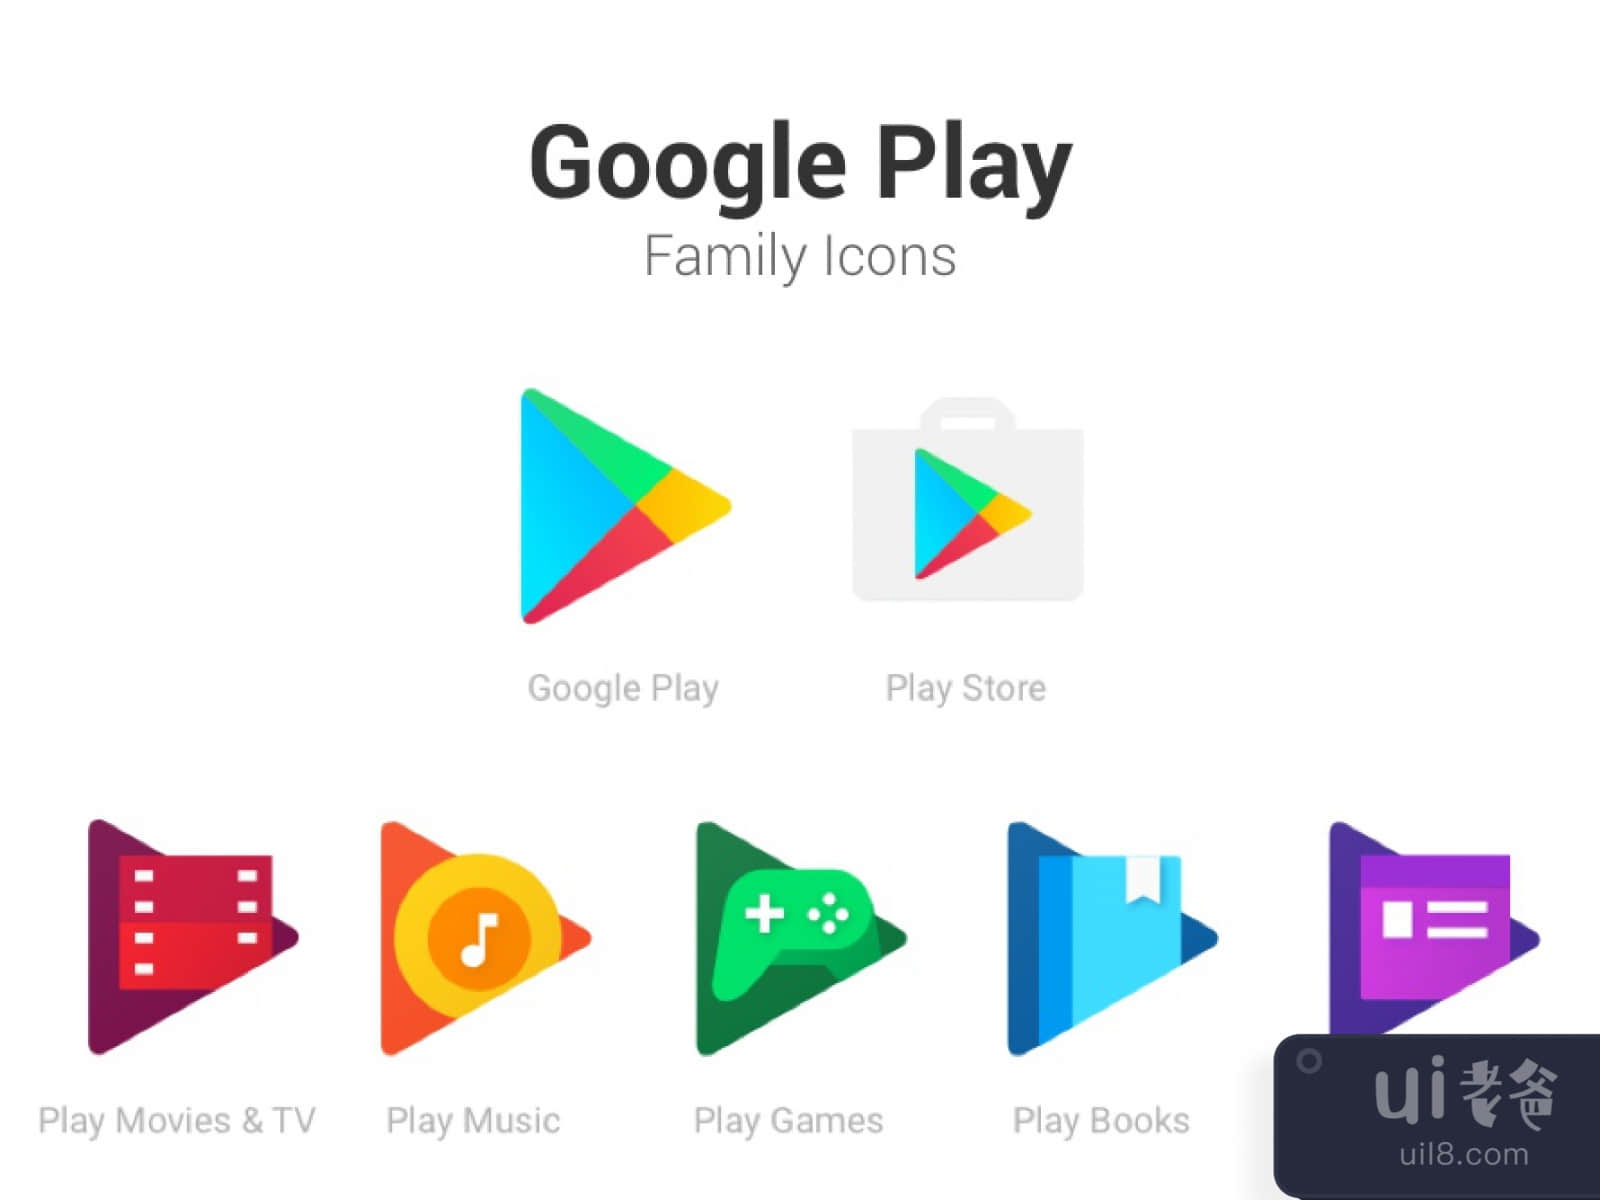 Google Play Family Icons for Figma and Adobe XD No 1